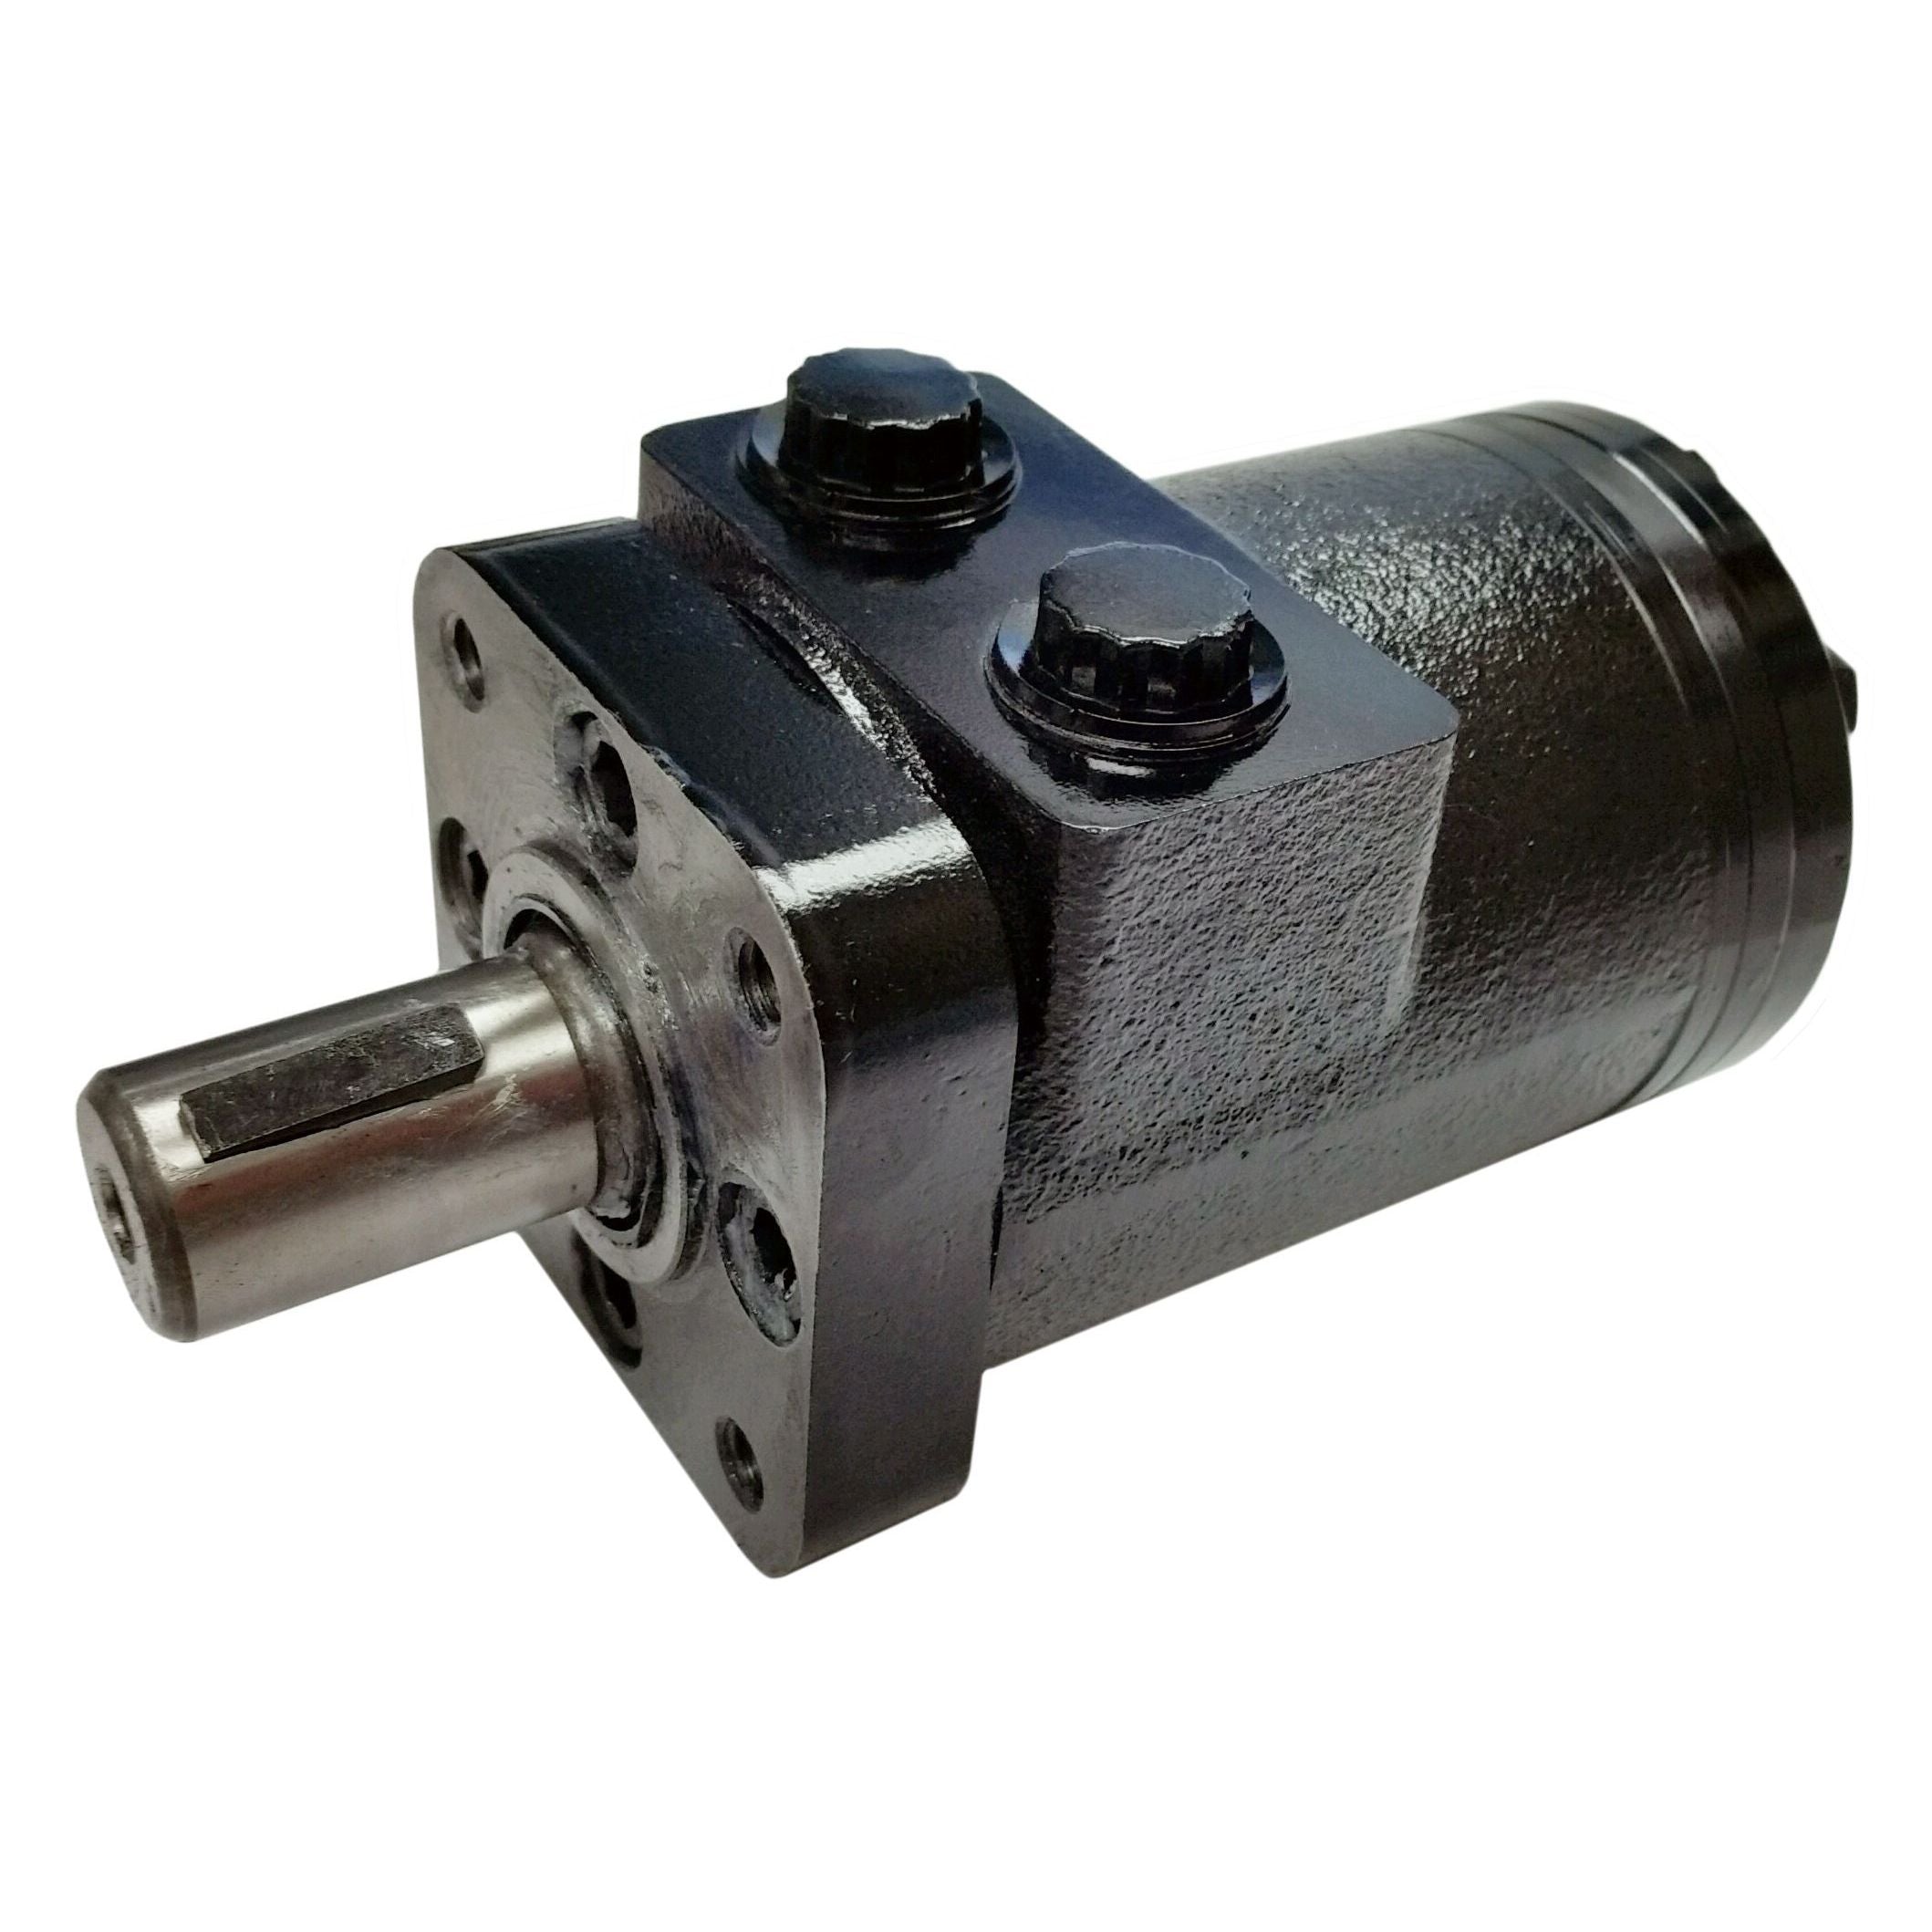 BMPH-100-H4-S-F : Dynamic LSHT Motor, 96.2cc, 615RPM, 1611in-lb, 2031psi Differential, 15.85GPM, SAE A 4-Bolt Mount, 6-Tooth Shaft, Side Ported, Manifold